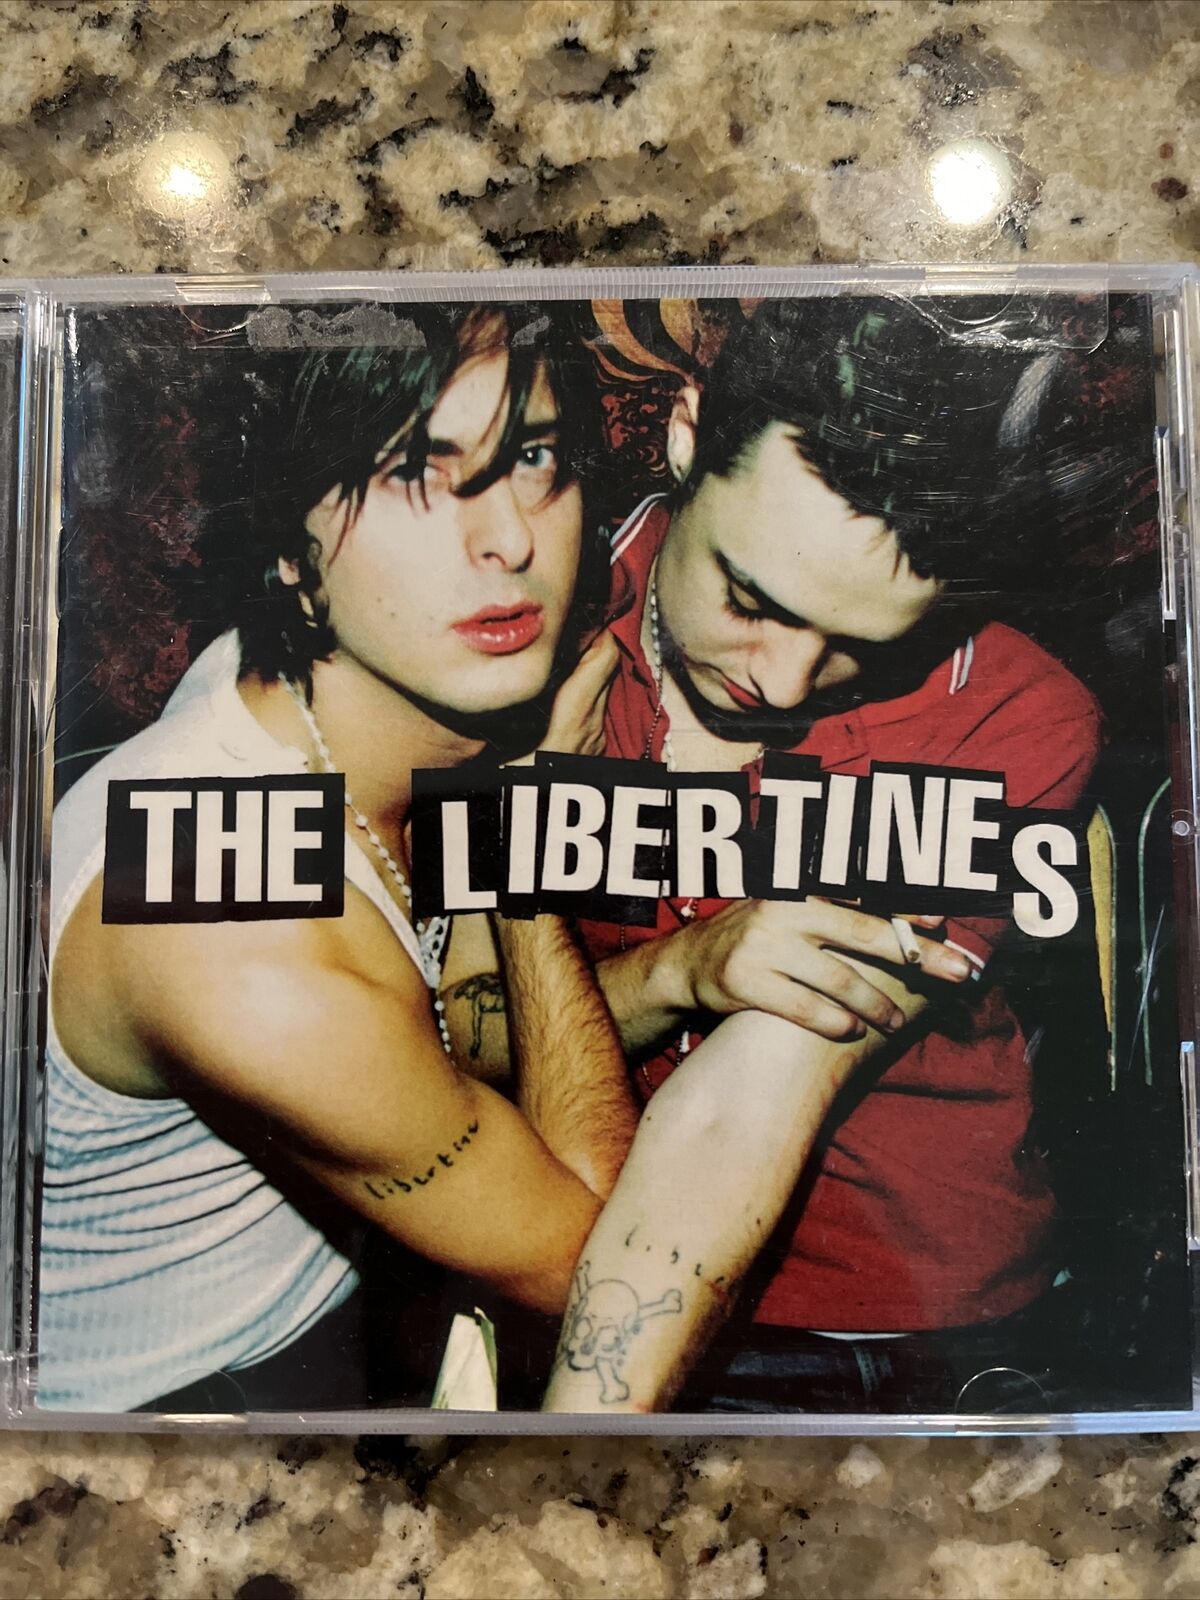 The Libertines [PA] by The Libertines (CD, Aug-2004, Rough Trade)